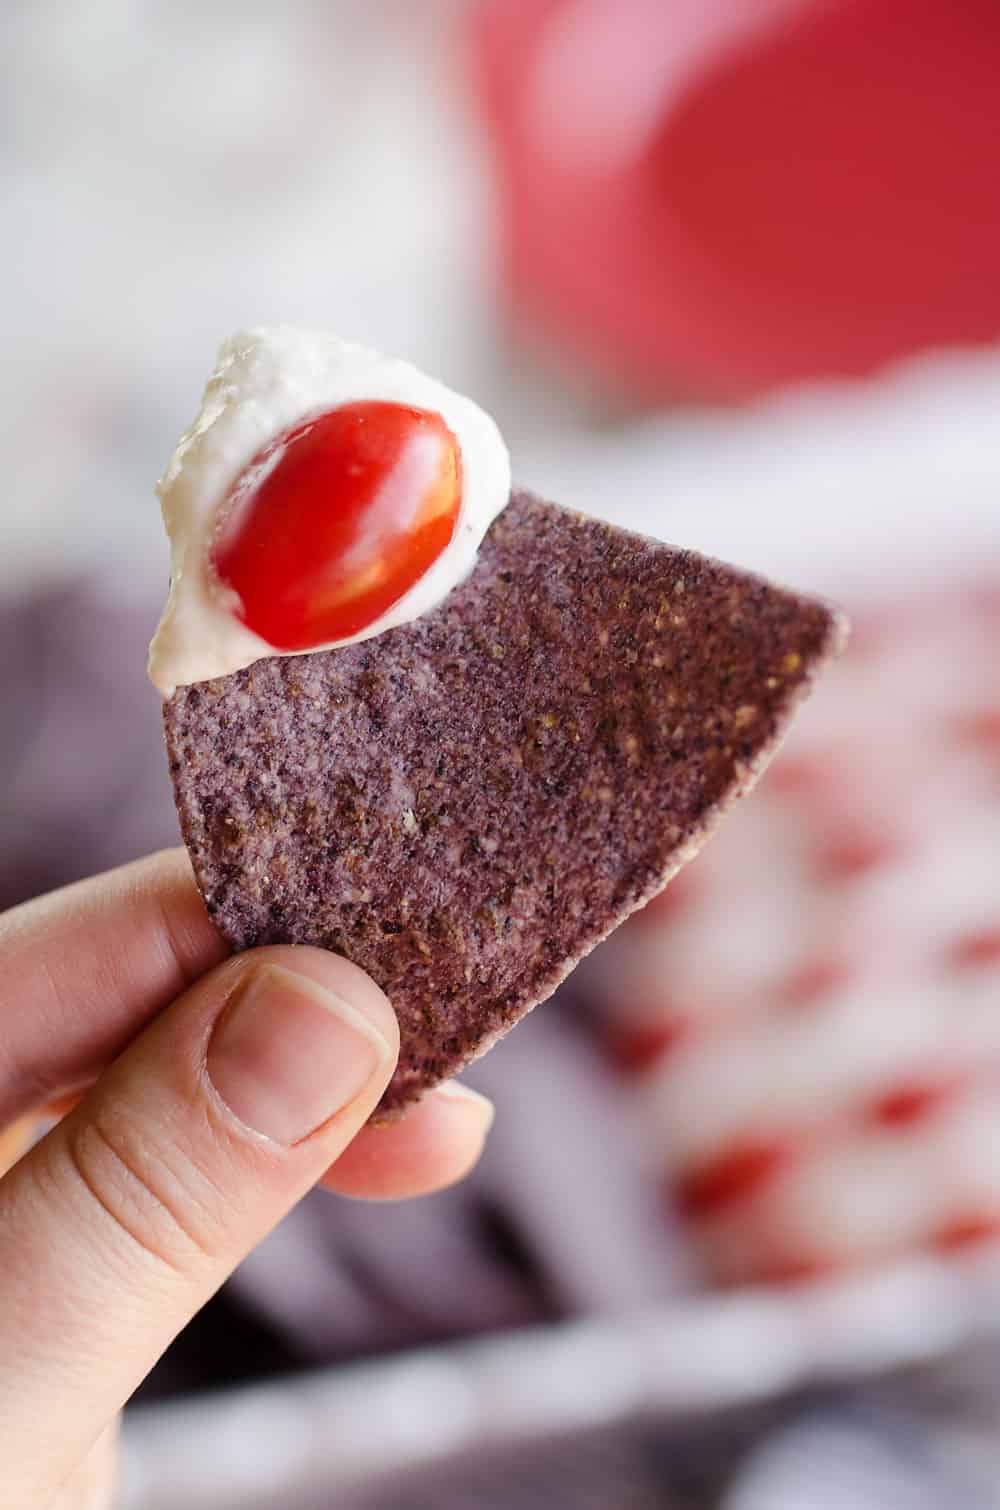 Patriotic Flag Parmesan Garlic Chip Dip is a festive appetizer recipe perfect for a holiday party with red, white and blue colors! A creamy Parmesan garlic dip is topped with cherry tomatoes and served with blue corn tortilla chips for a delicious dish sure to be a crowd pleaser. 